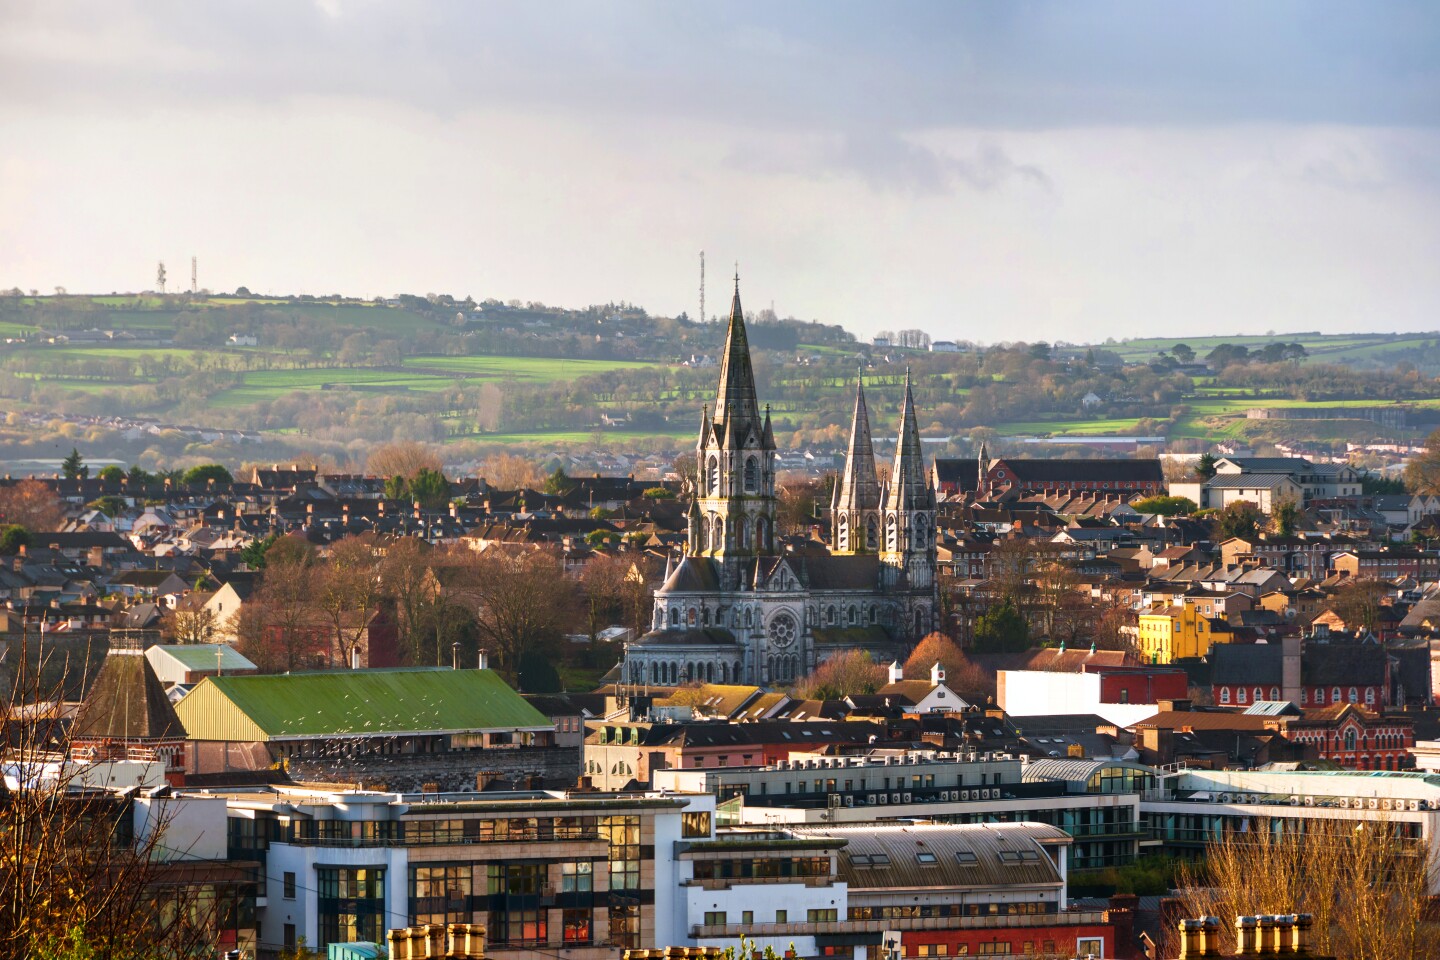 <h2>9. Cork, Ireland</h2> <p><b>August is great for:</b> Kissing the Blarney Stone, whoever you are</p> <p>This month there are several events that make this town appealing, notably the <a class="Link" href="https://corkpride.com/" rel="noopener">Pride festival</a> takes place on August 5th, a reminder of <a class="Link" href="https://www.afar.com/travel-guides/ireland/guide" rel="noopener">Ireland</a>’s newfound acceptance of LGBTQ+ communities (it legalized equal marriage mere months after the USA, in 2015, and by popular consent, to boot, via a national referendum on the issue). There’s also the Cork on a Fork Fest later in the month, with five days of food demos, masterclasses and talks. Don’t leave town without a pint of two—Guinness or otherwise—at one of the historic pubs in town, like the Mutton Lane Inn, a dark wood-lined den that’s almost 200 years old.</p> <p>Remember, even though it’s midsummer, a light sweater or two will come in handy in Cork: Its position on the Atlantic means that even this month, there can be crisp spells.</p> <h3>Where to stay: The Montenotte</h3> <ul>   <li><b>Book now: </b><a class="Link" href="https://www.themontenottehotel.com/" rel="noopener">The Montenotte</a></li>  </ul> <p>This four-star, 107-room modernist hotel sits on a hill just outside the city center, with spectacular views over the harbor—don’t miss lunch or dinner at the hotel’s flagship restaurant, Panorama, which relies heavily on locally sourced Irish produce.</p> <h3>How to get to Cork</h3> <p>There are no direct long-haul flights to Cork from the USA. Instead, fly to Shannon or Dublin—all of DHS paperwork’s completed before you board, which means you land stateside as if you were a domestic passenger. There’s ample service on Aer Lingus to either airport from the USA (it serves 14 U.S. airports). The three-hour drive from Dublin down to Cork is a bonus chance to soak up the countryside.</p>